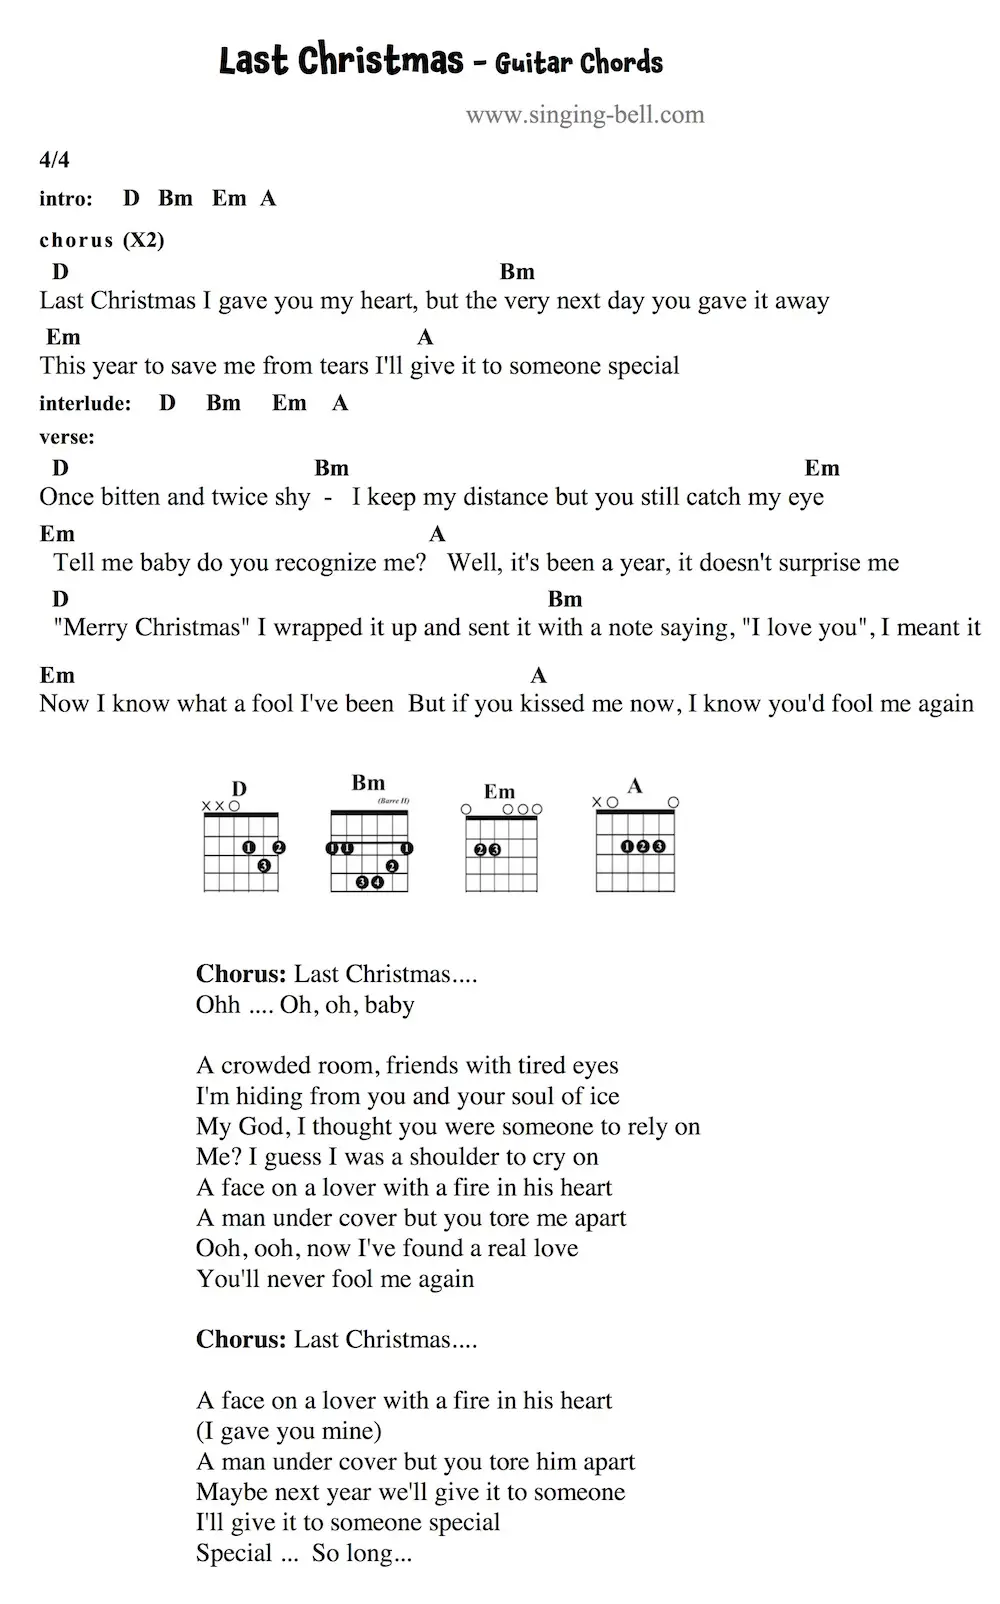 Last Christmas - Guitar Chords and tabs.